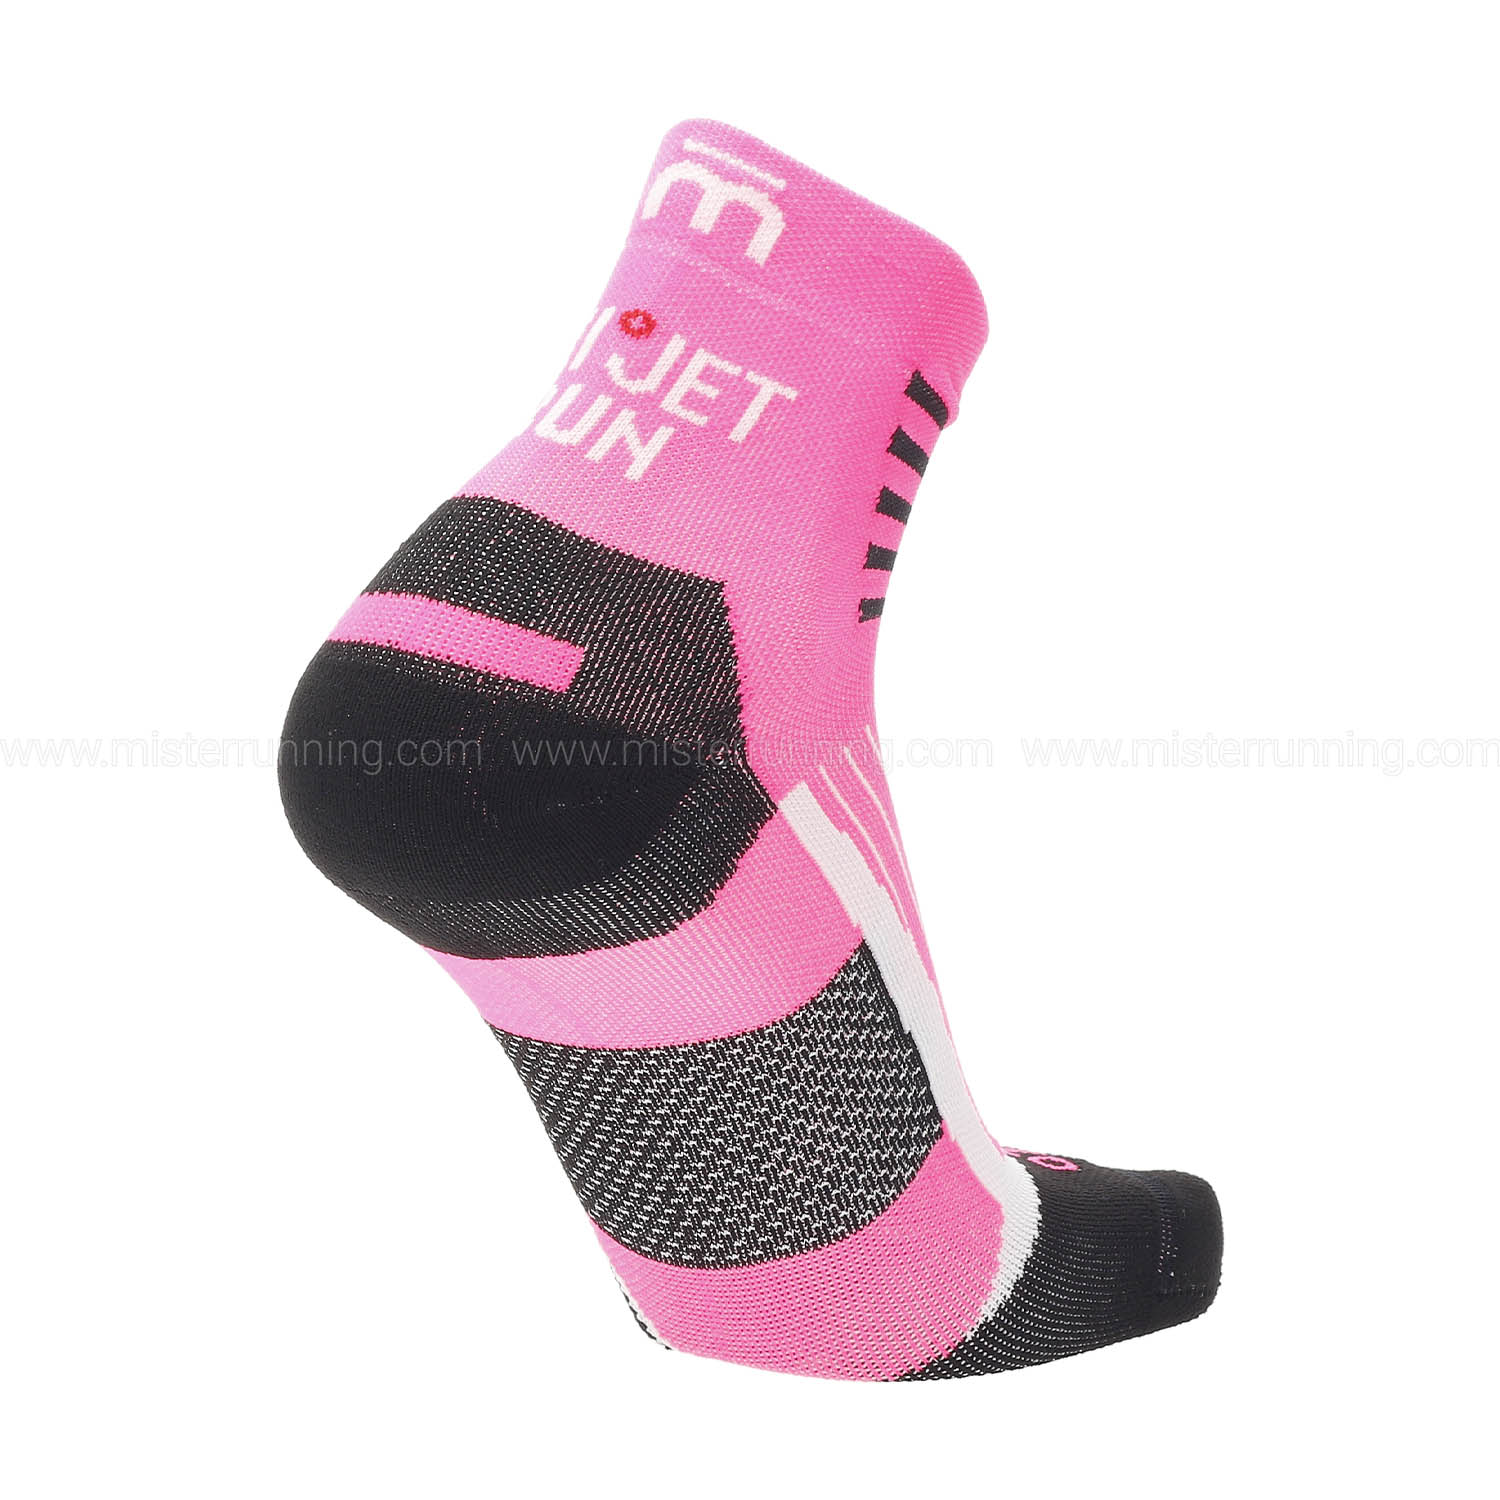 Mico Oxi-jet Light Weight Compression Calze - Fucsia Fluo